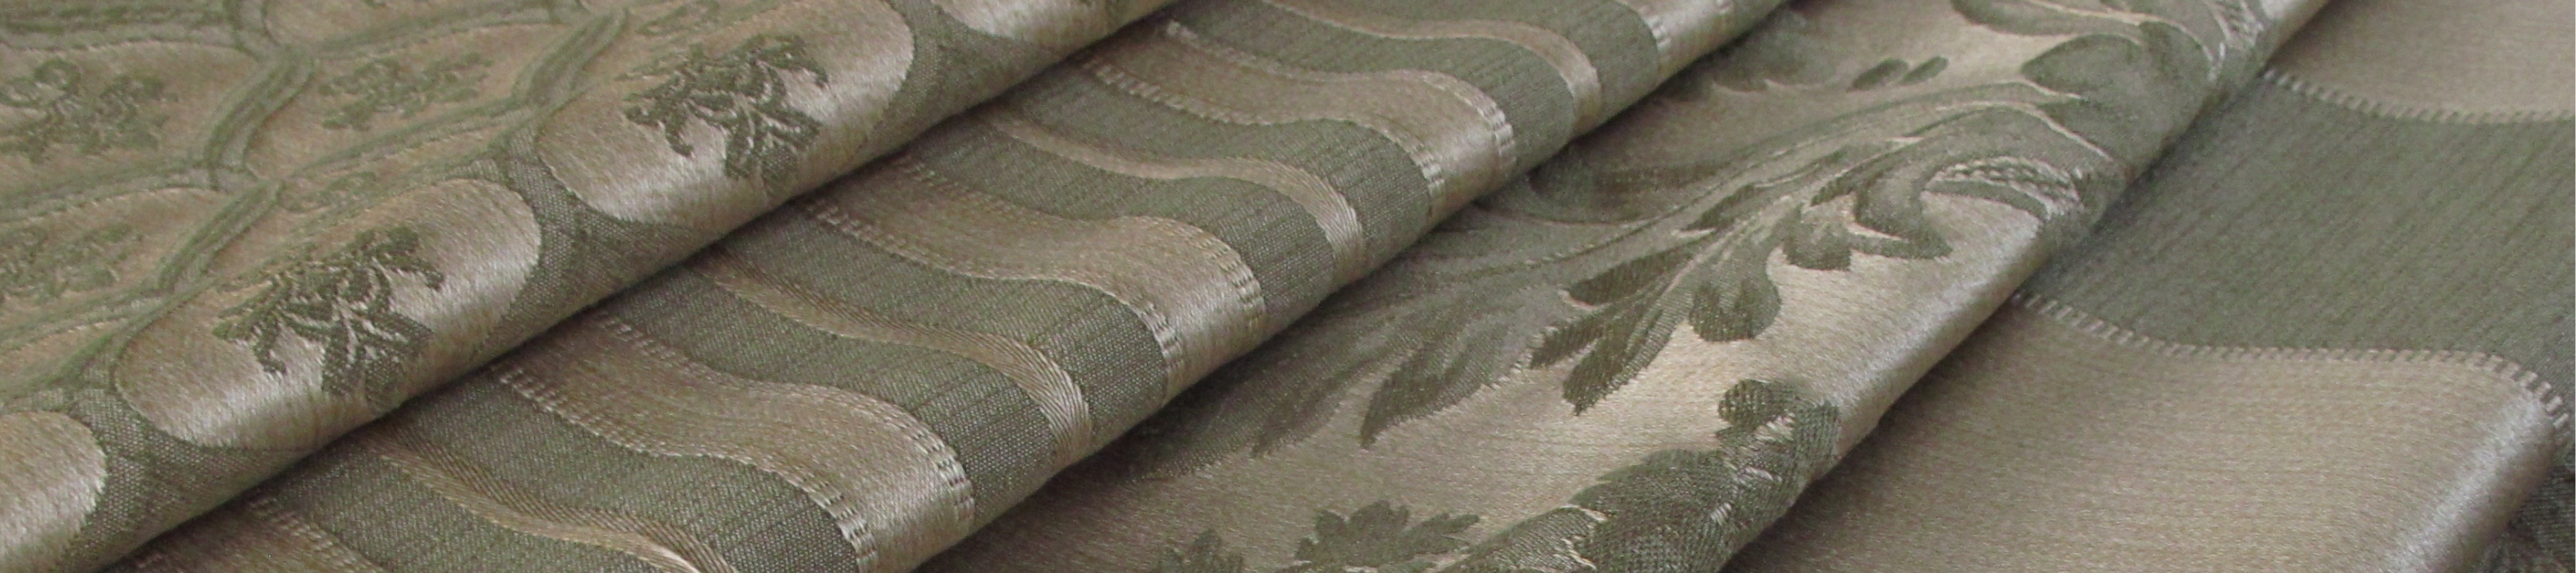 BYRNES WILLOW Jacquard Upholstery Fabric